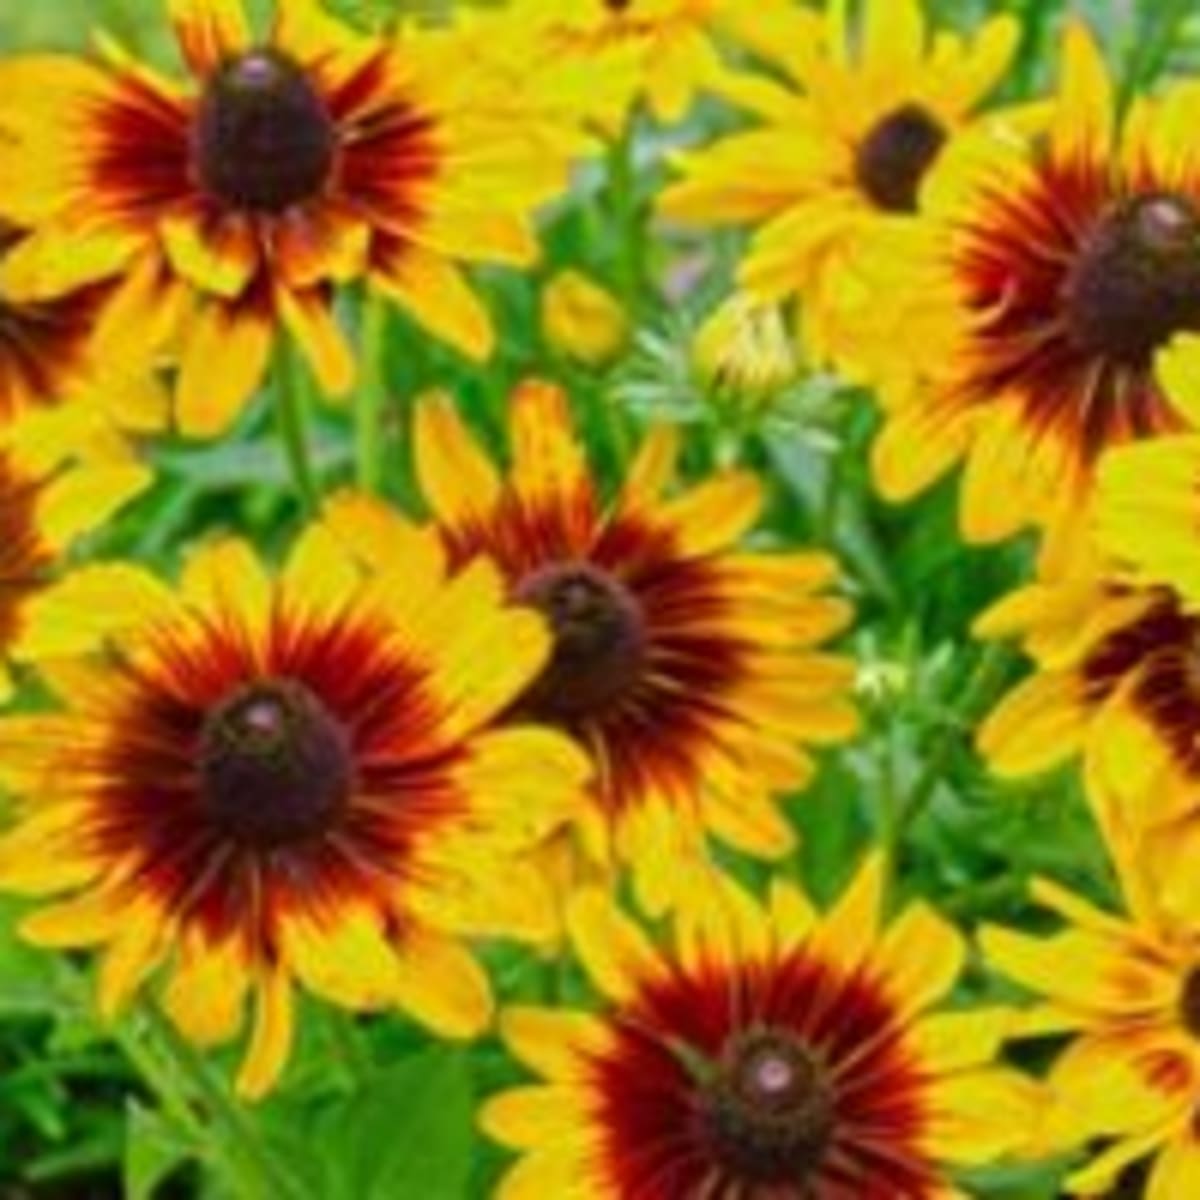 Denver Daisy Brings Bright Color For Summer Horticulture,Juniper Ground Cover Ideas